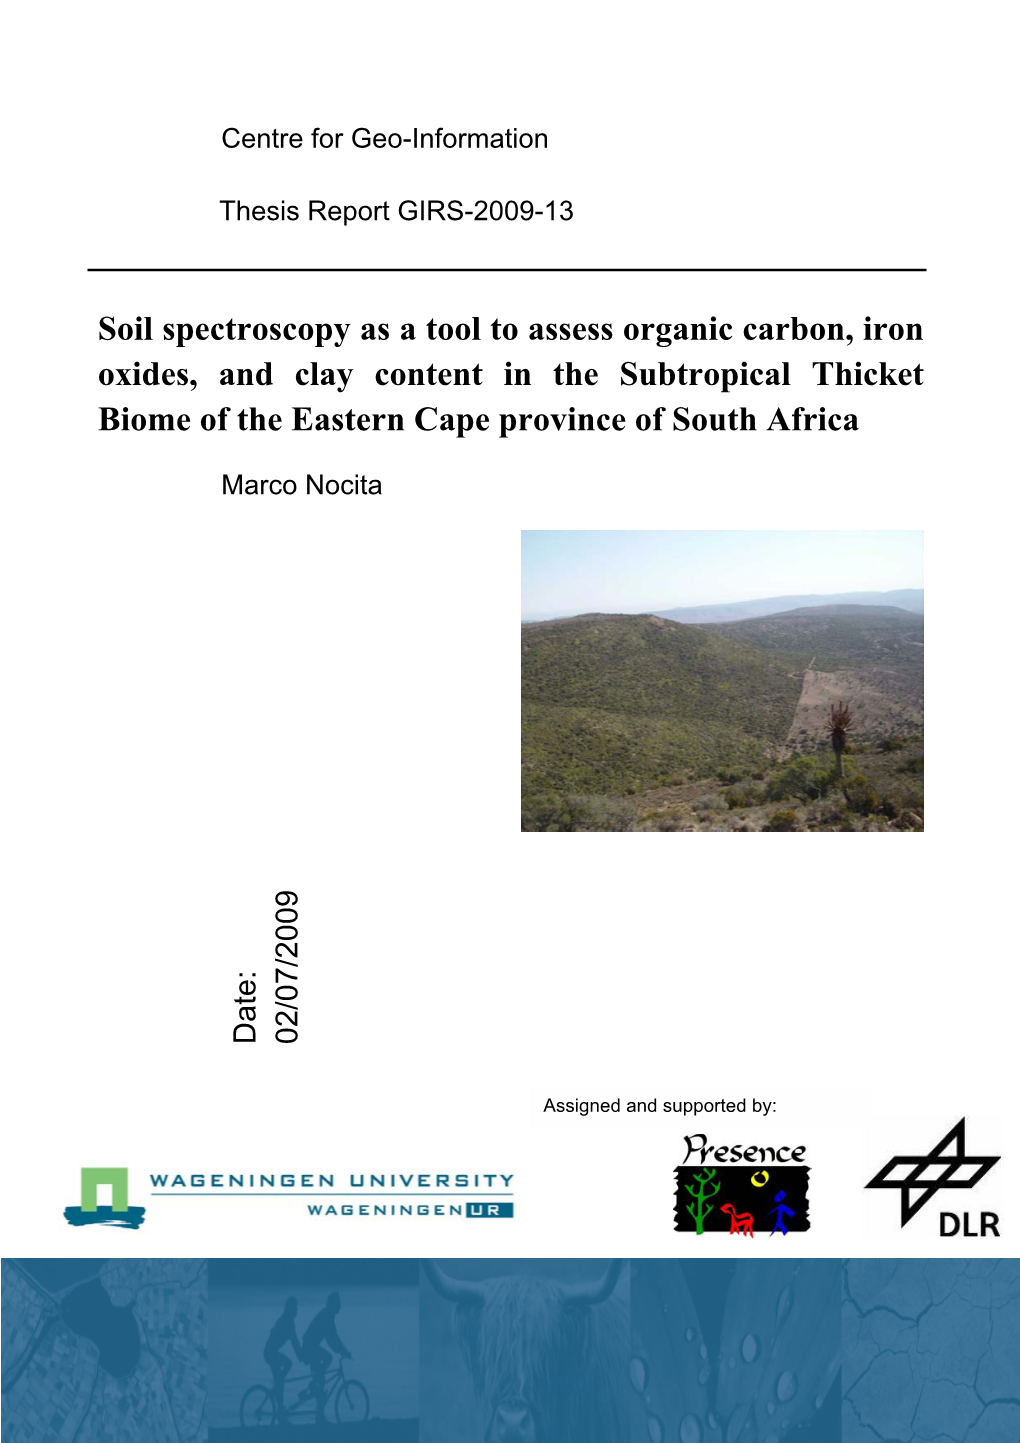 Soil Spectroscopy As a Tool to Assess Organic Carbon, Iron Oxides, and Clay Content in the Subtropical Thicket Biome of the Eastern Cape Province of South Africa